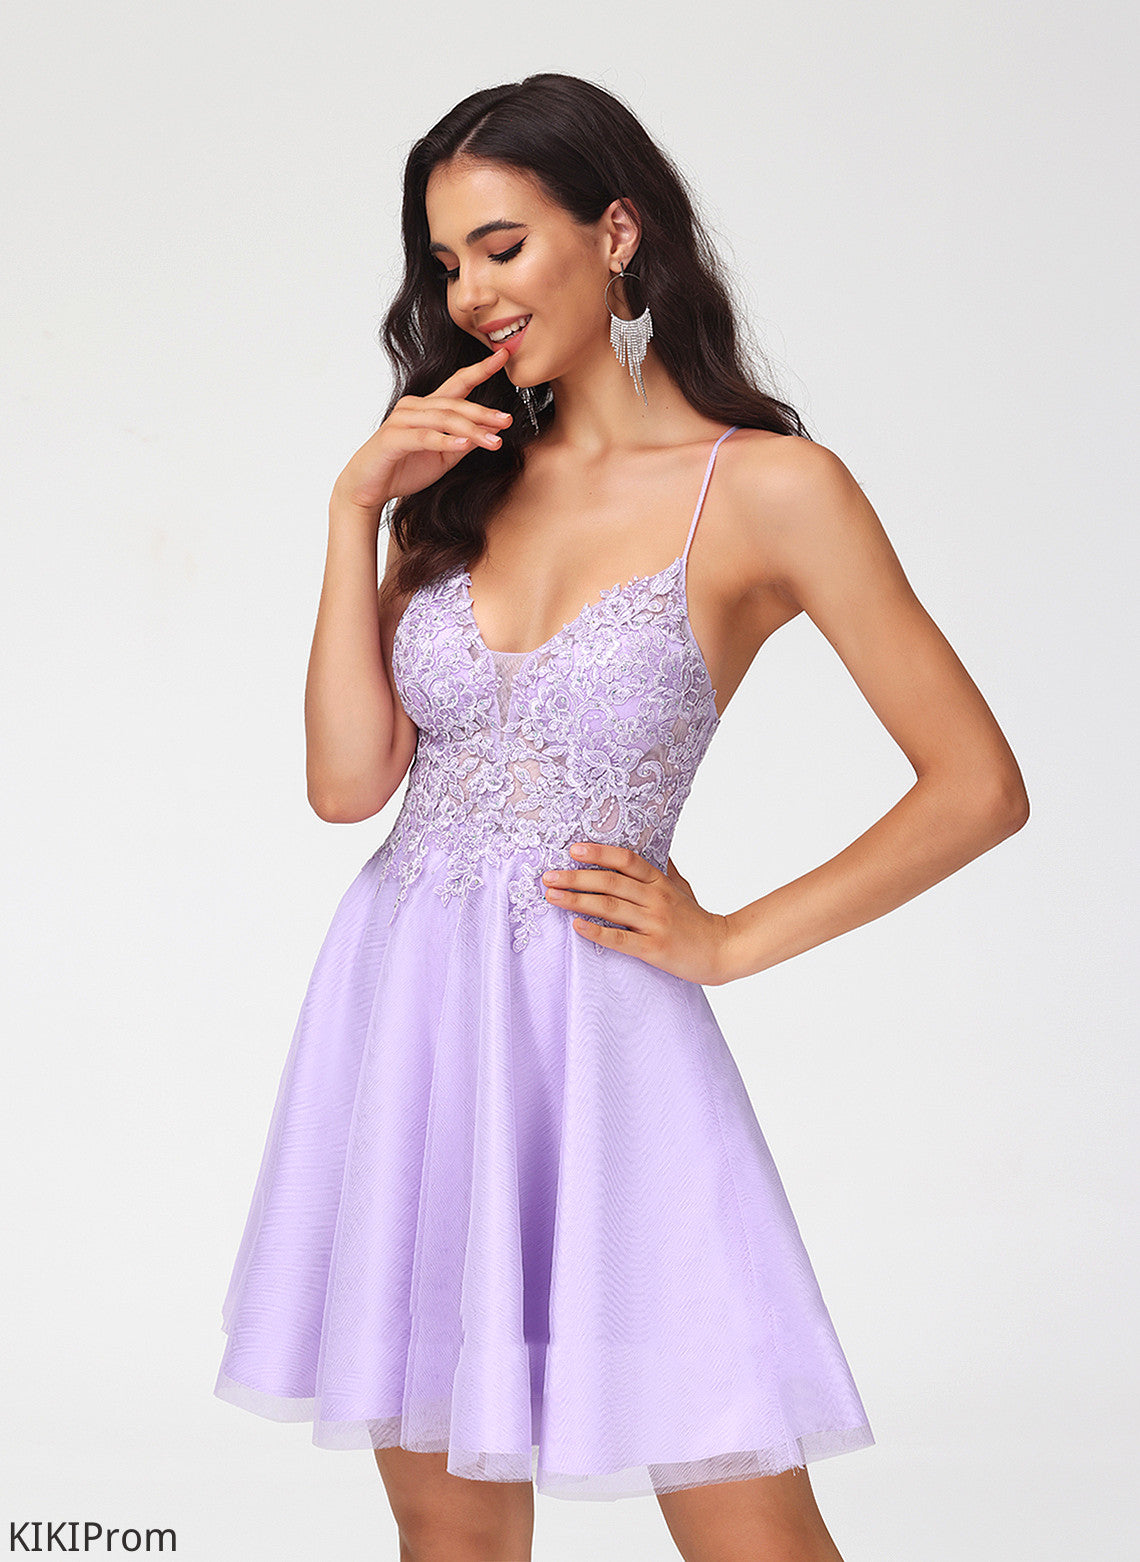 Nellie Tulle Dress Beading Homecoming V-neck Homecoming Dresses Short/Mini Lace With A-Line